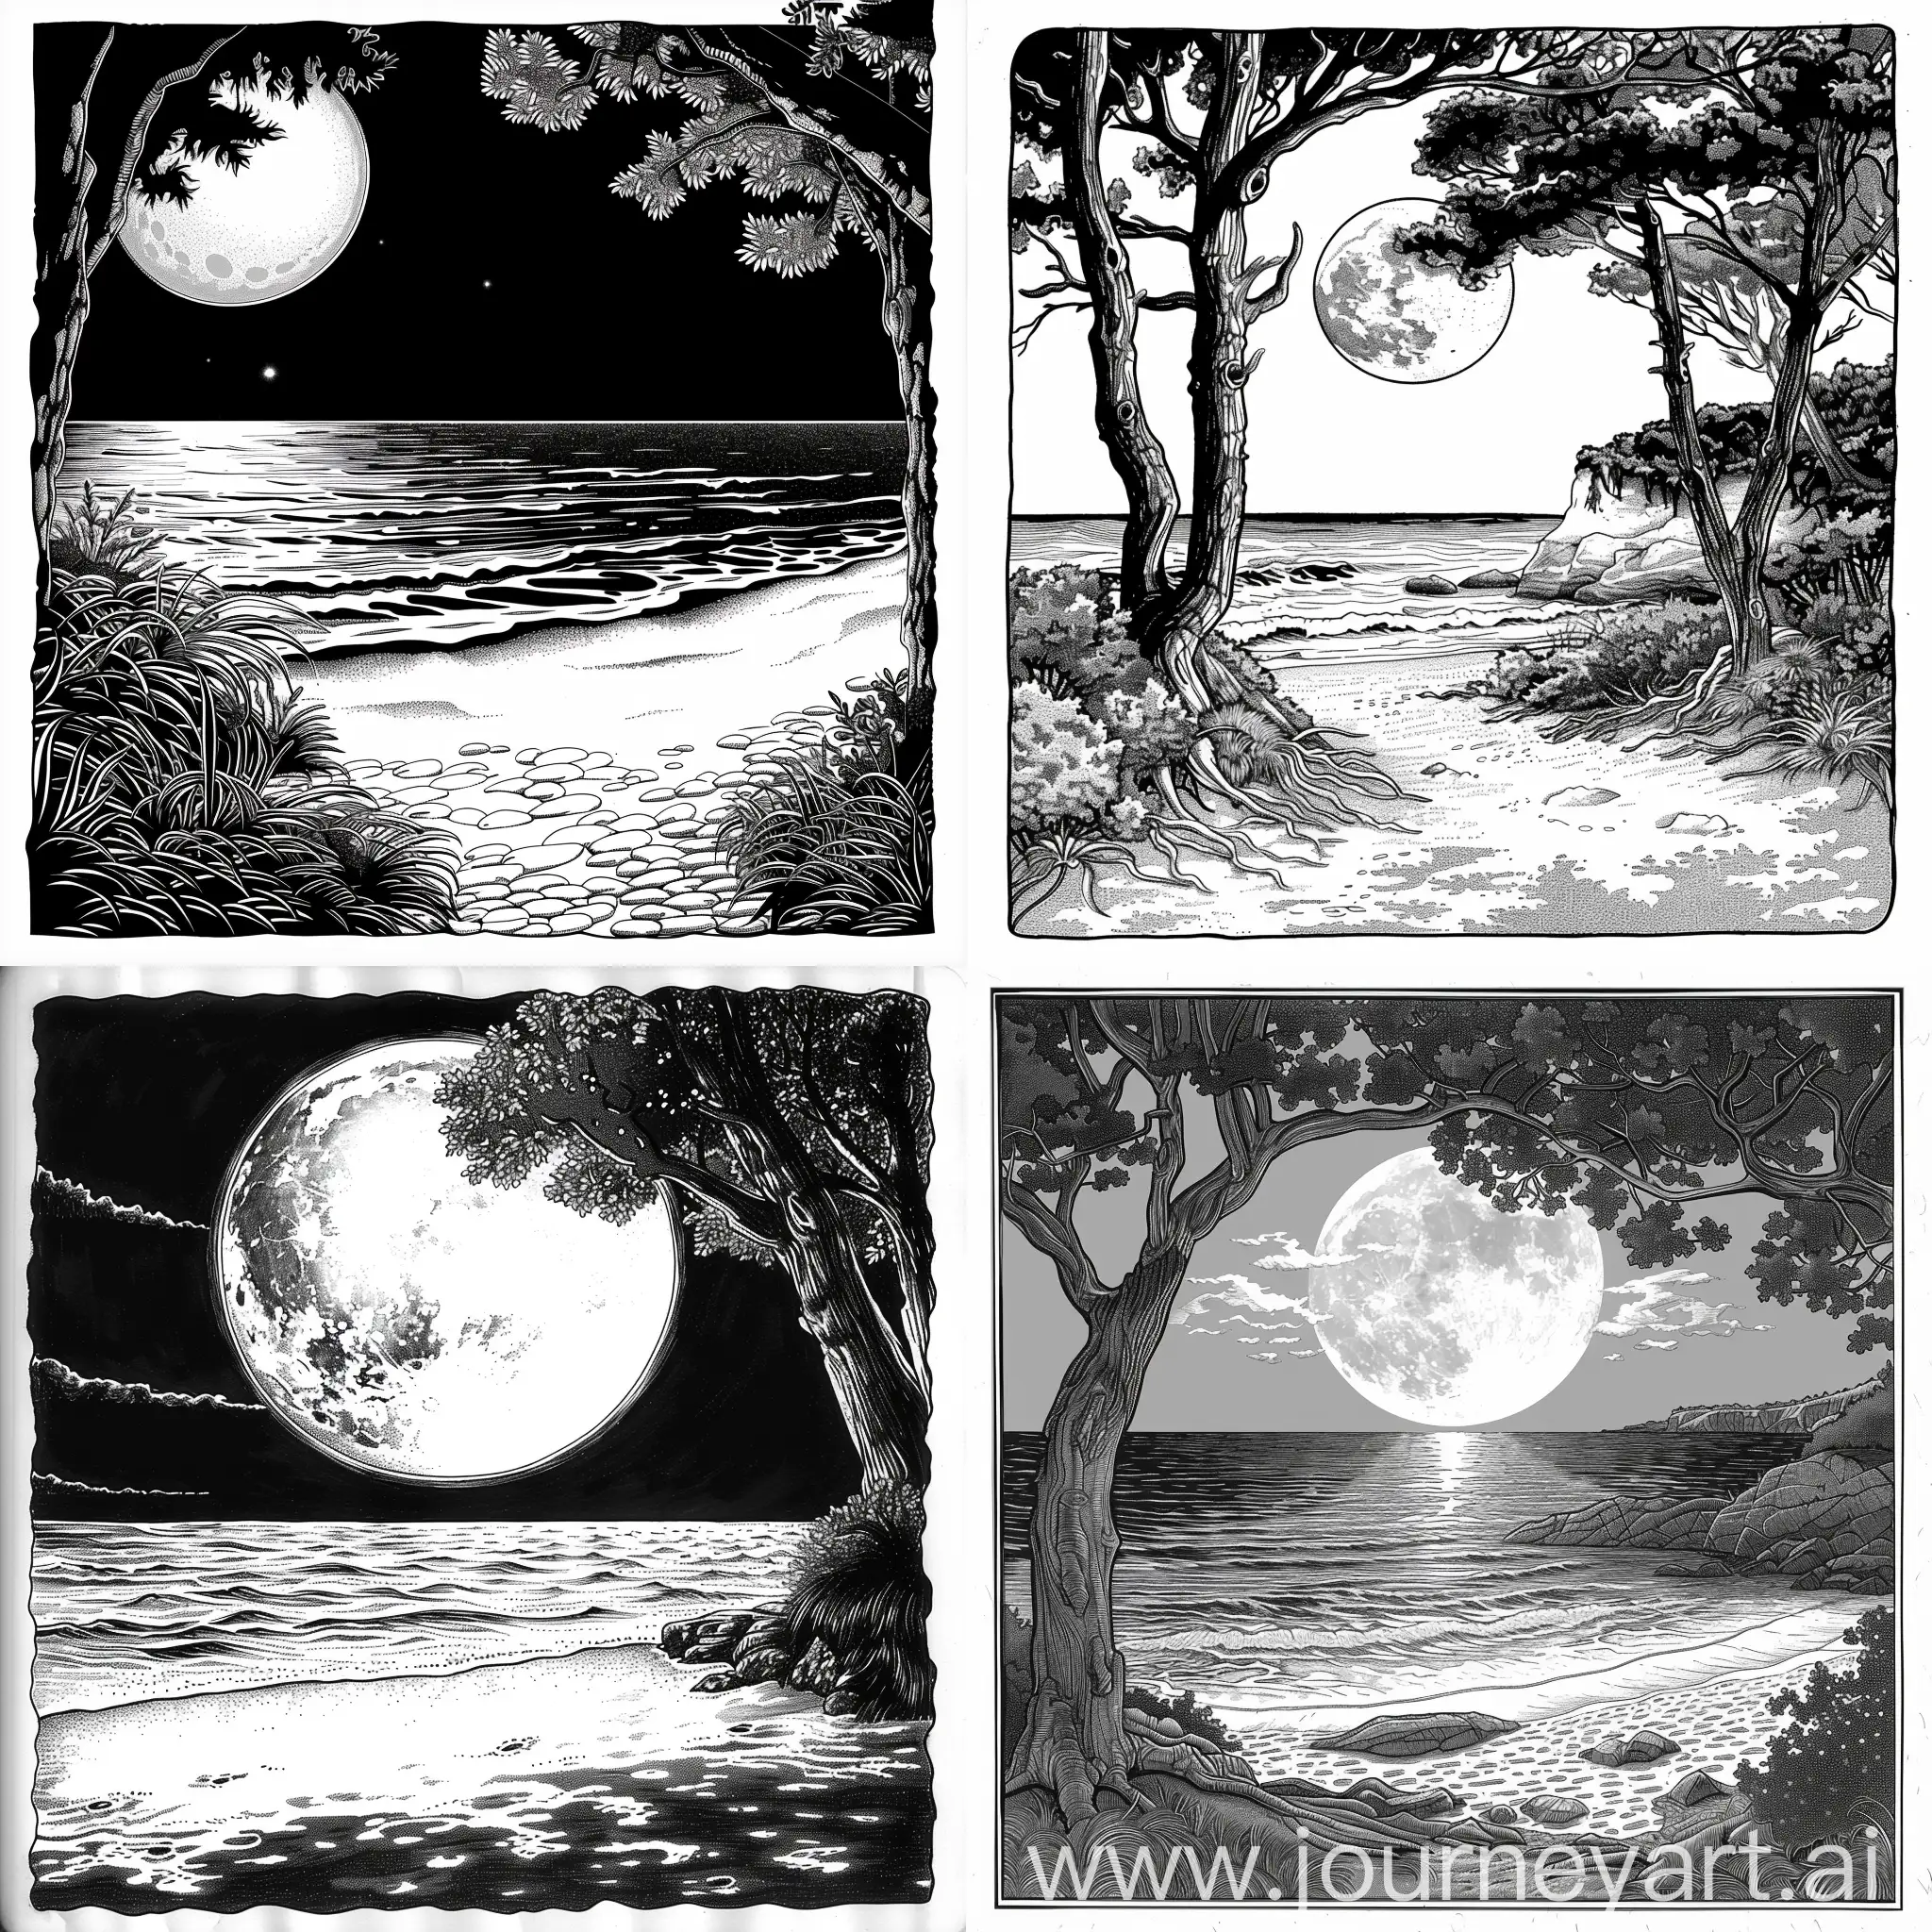 coloring book page, Colonial-Era The full moon illuminates the beach, casting long shadows and making the ocean shimmer in silver light, Black and white, white background